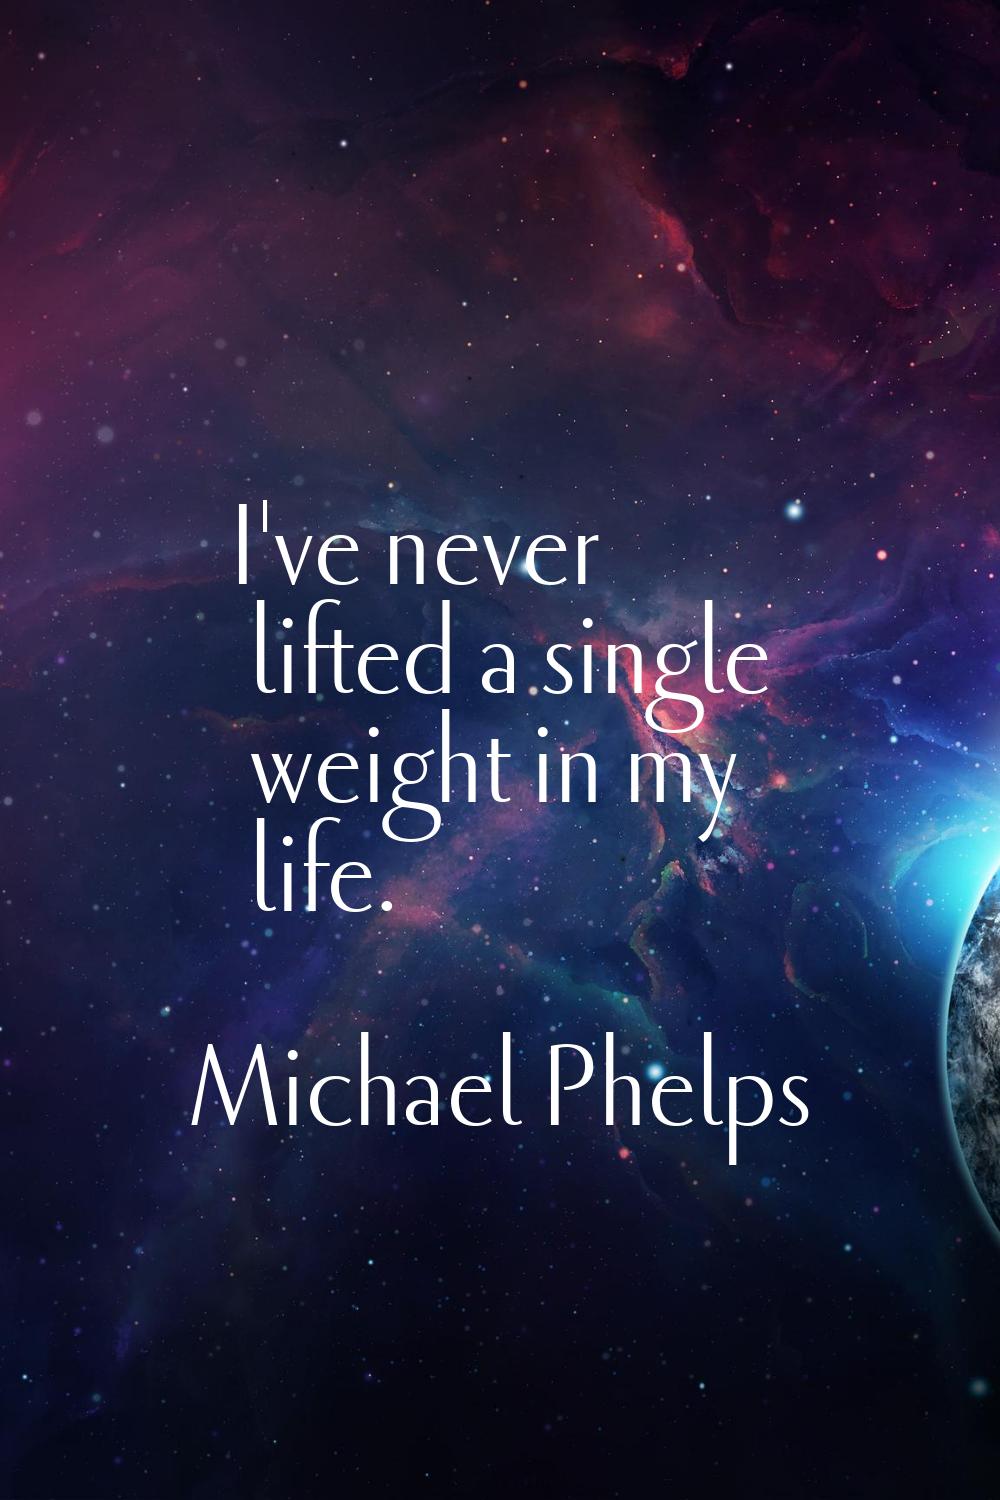 I've never lifted a single weight in my life.